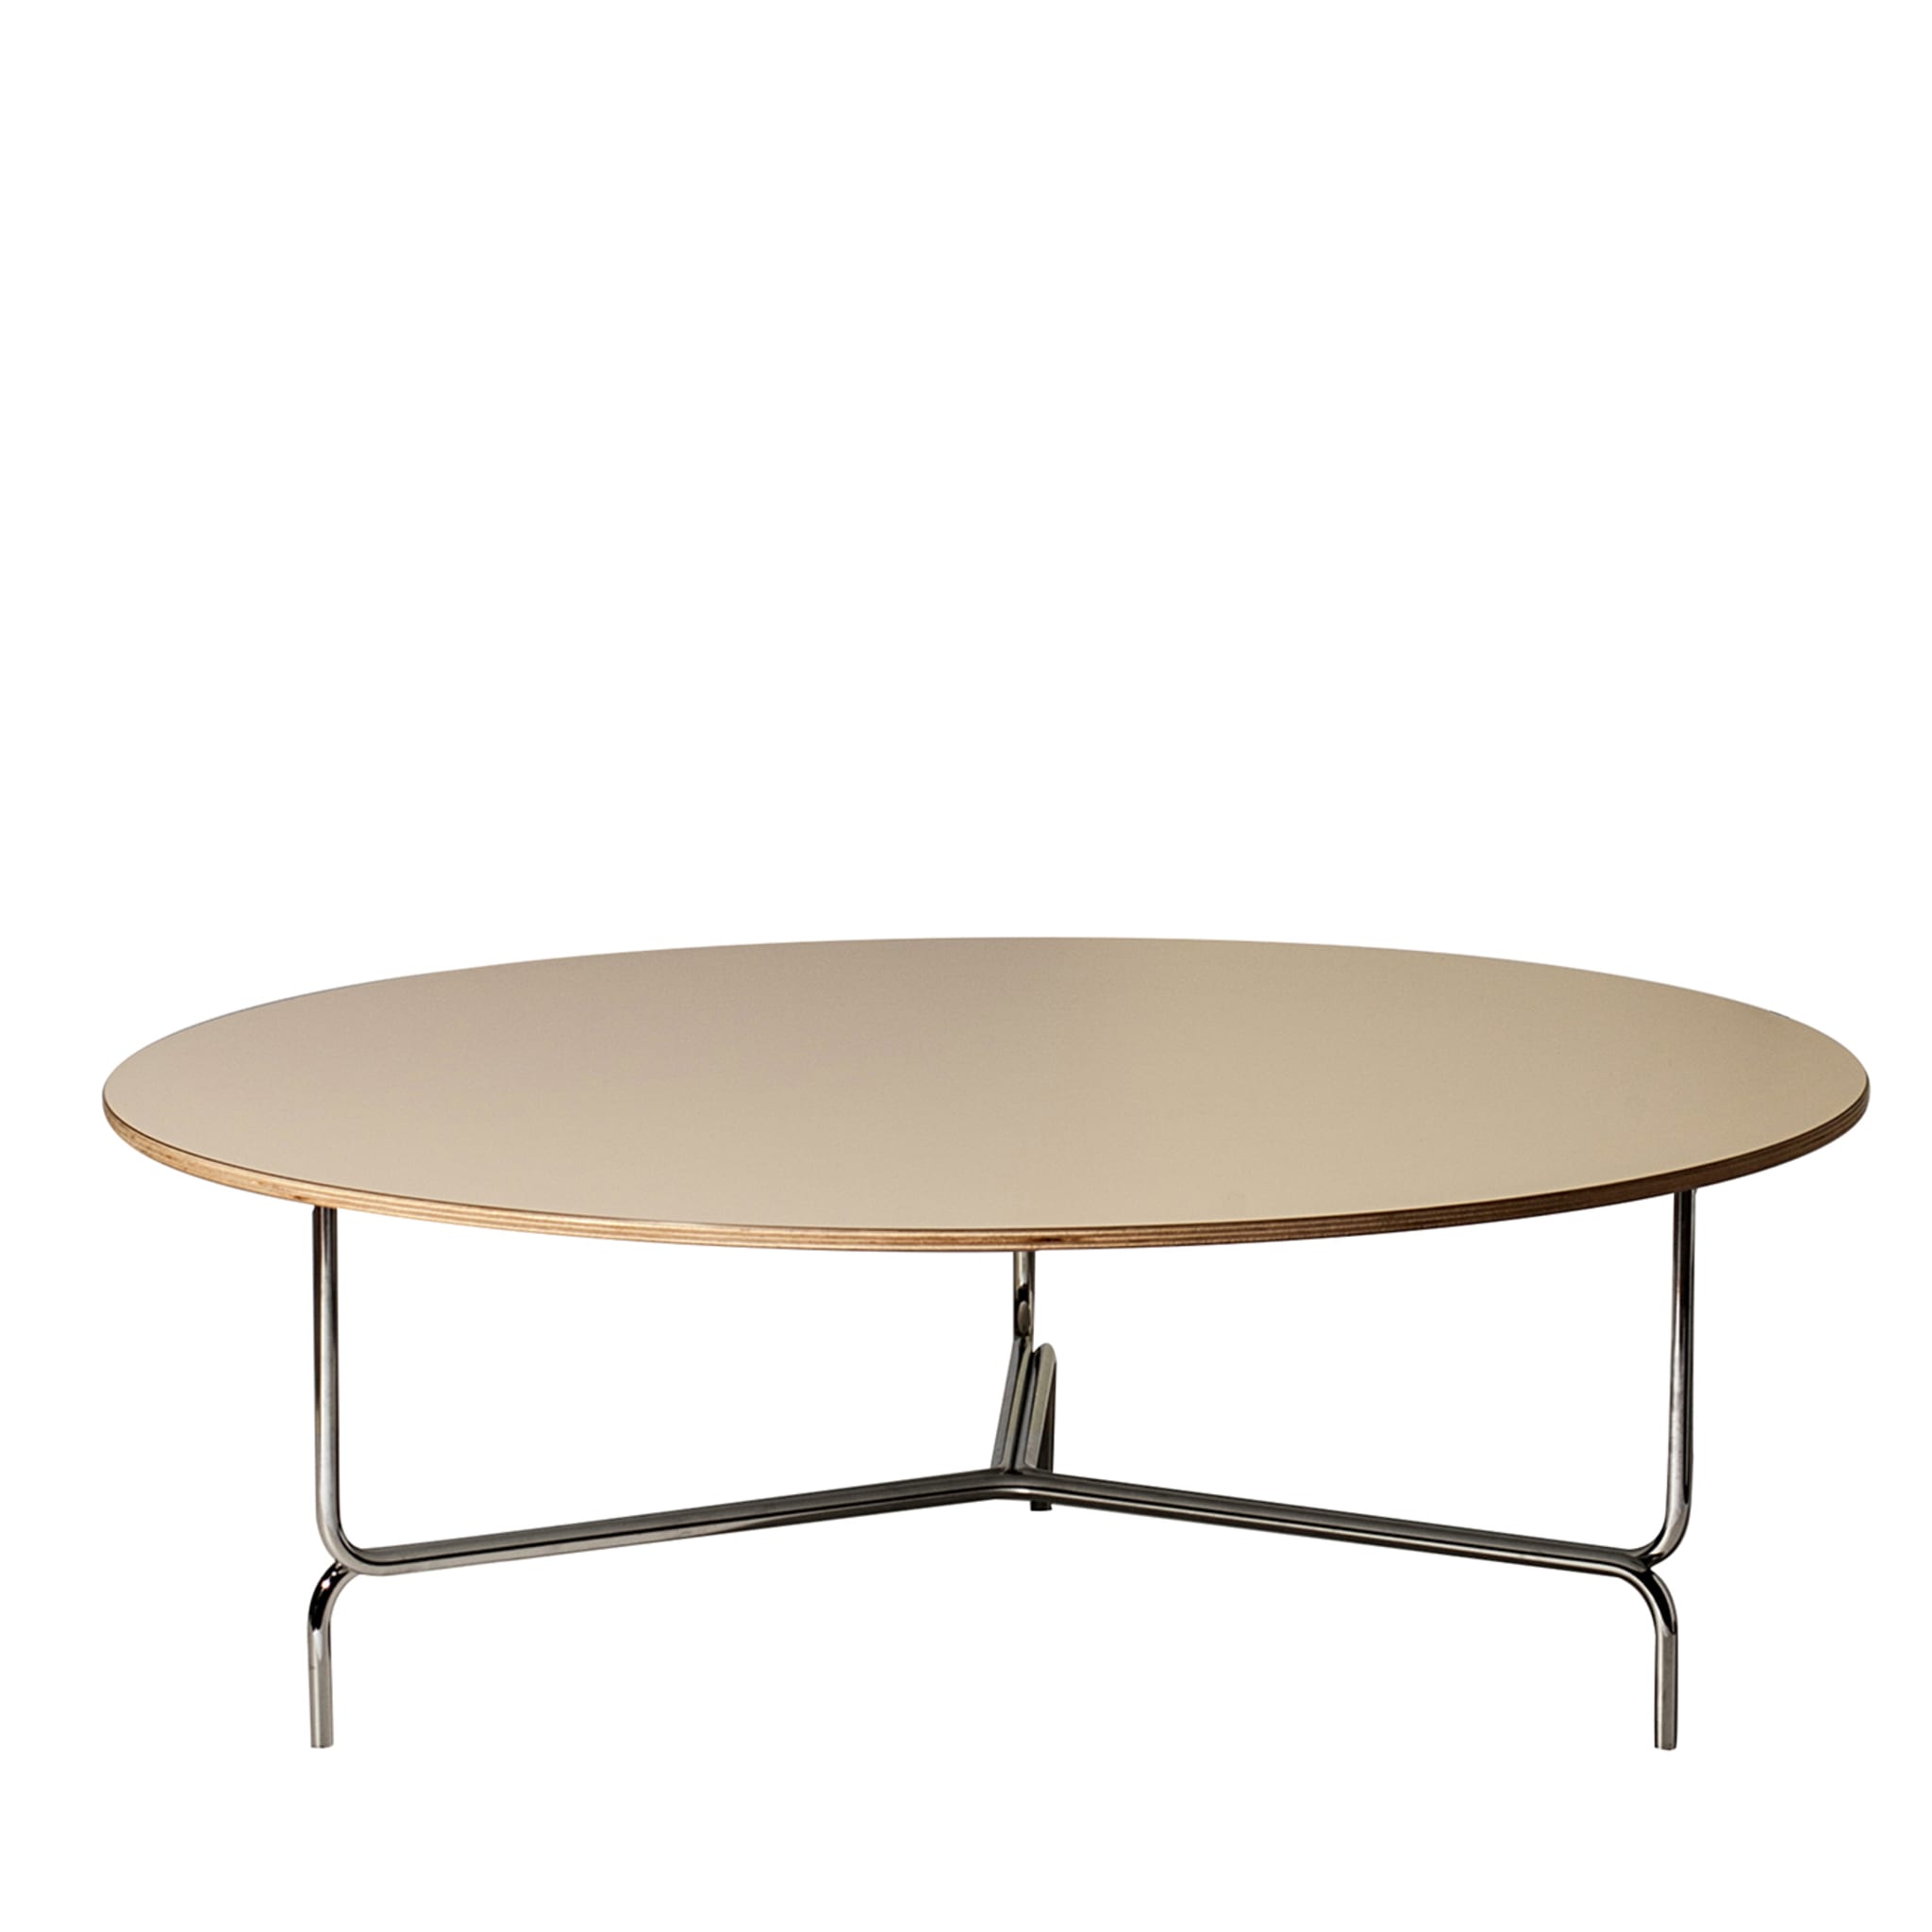 Litta Beige Low Coffee Table by R. Mangiarotti and I. Suppanen - Main view